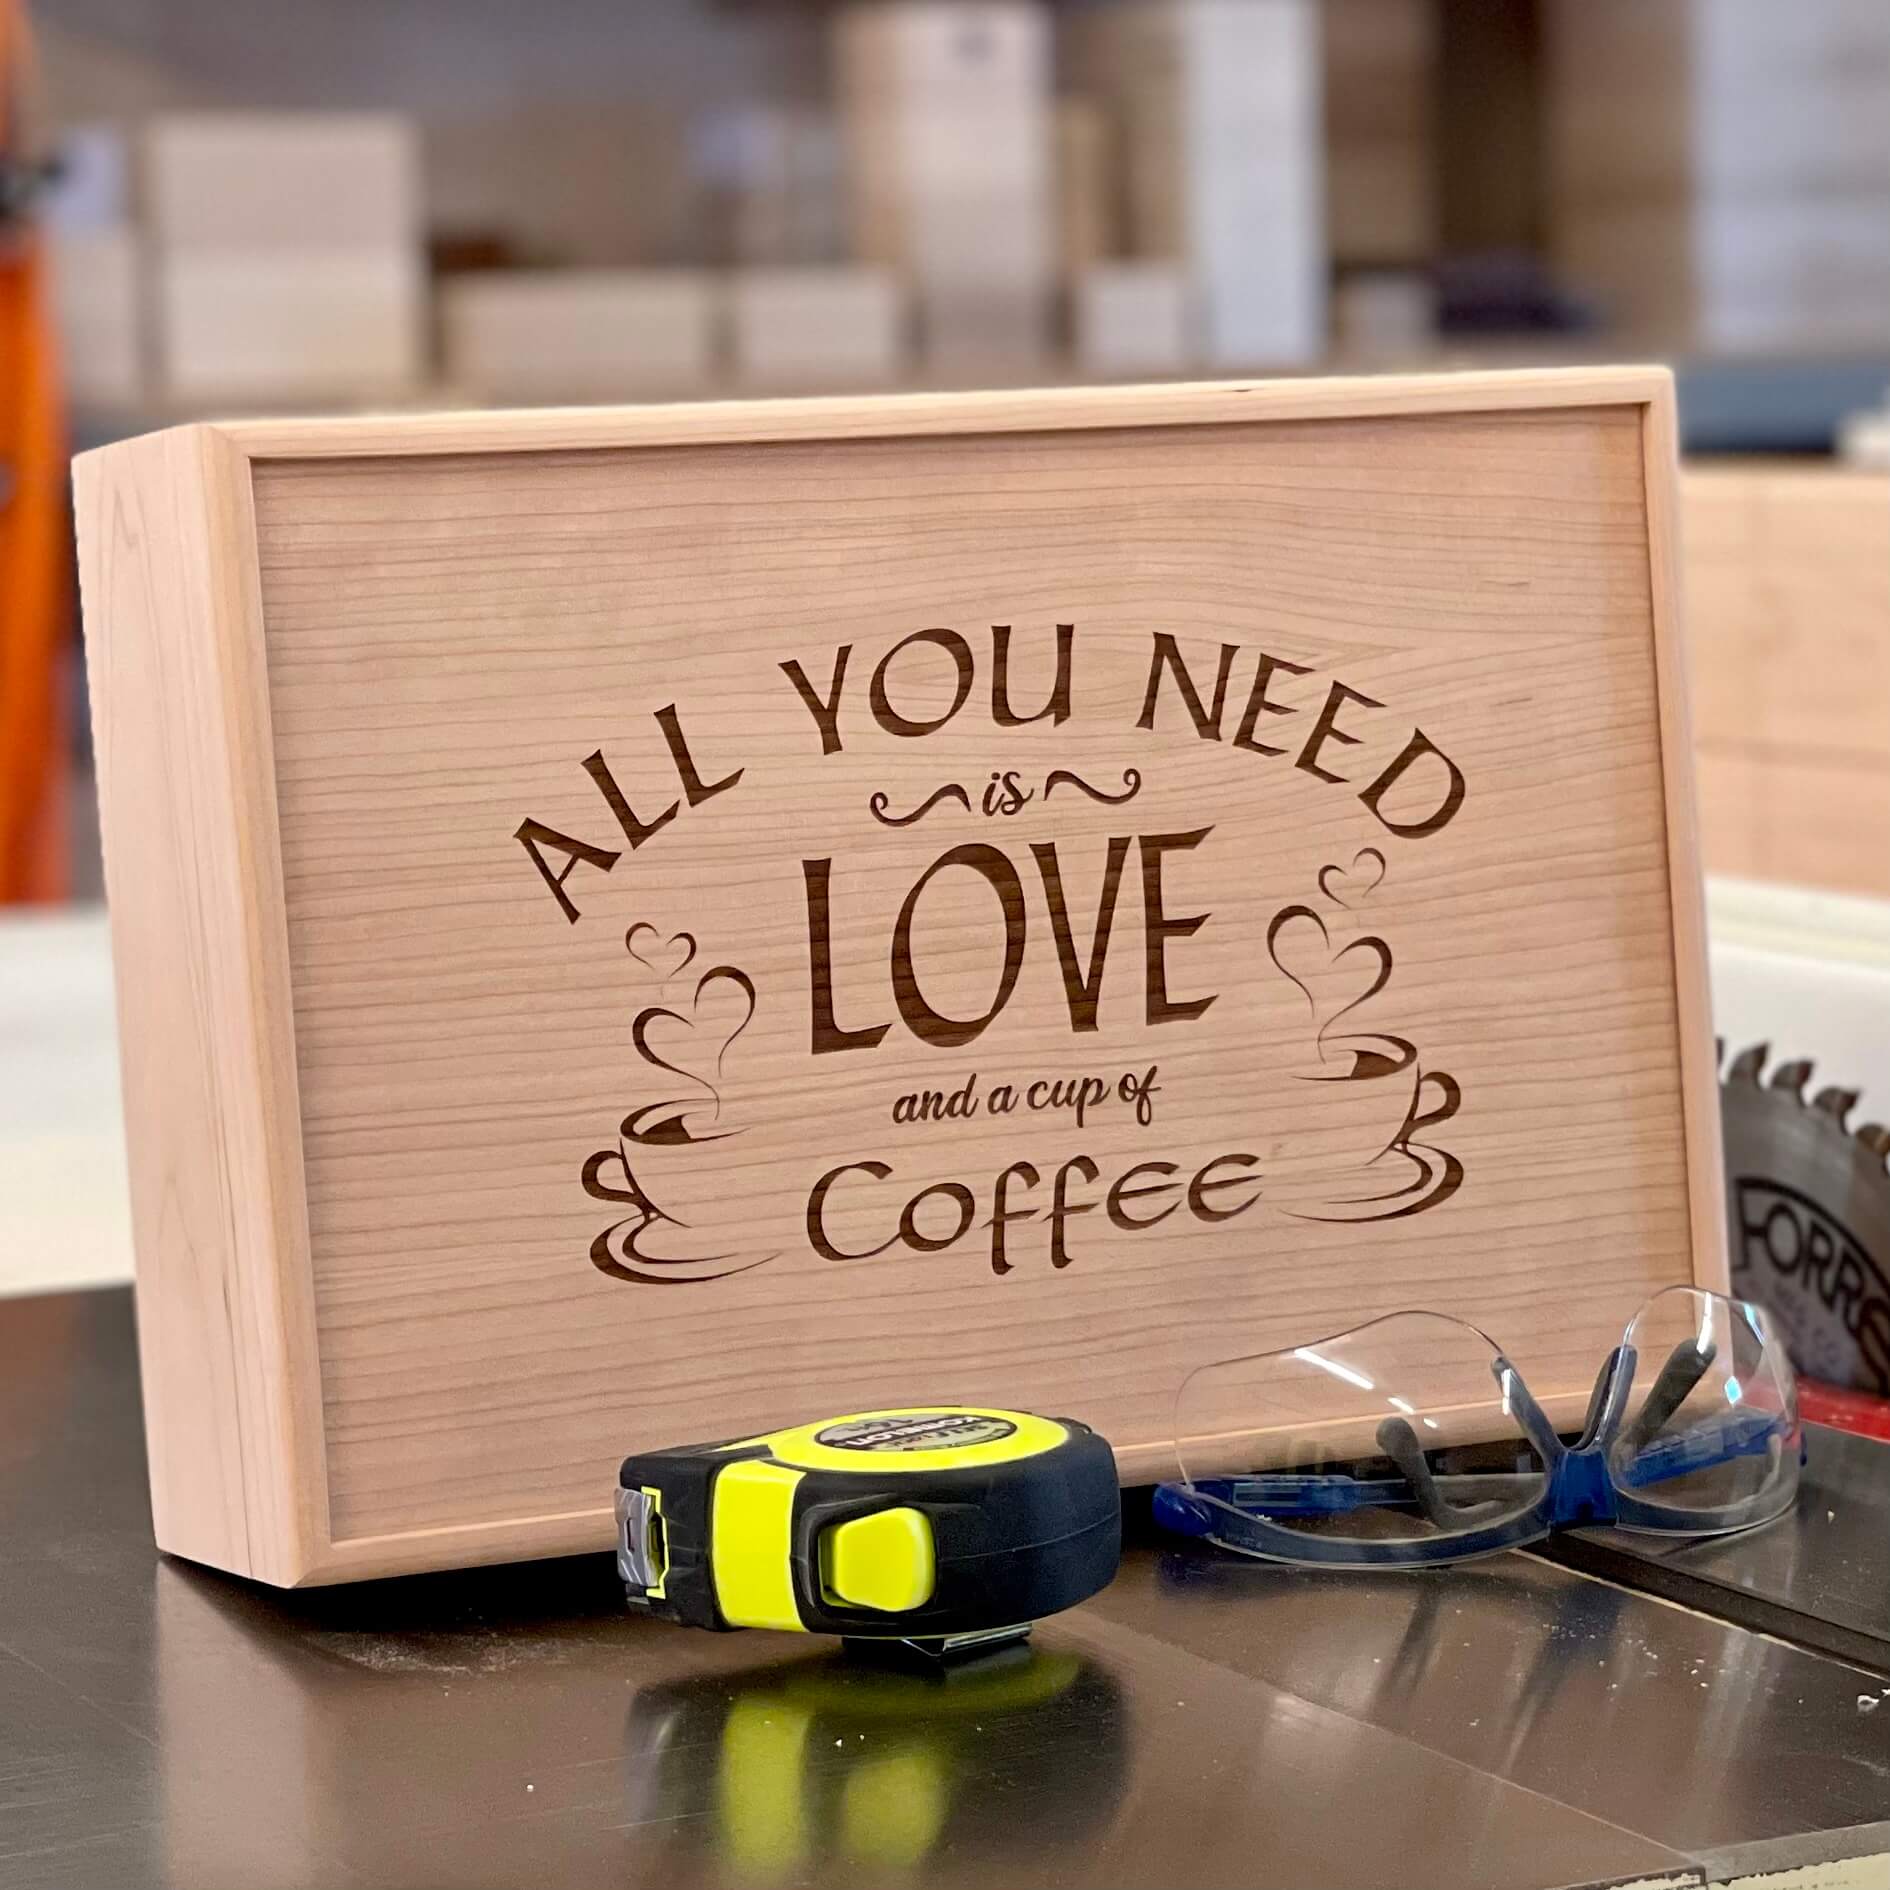 http://www.thedesigncraftstudio.com/cdn/shop/products/the-designcraft-studio-tea-boxes-k-cup-storage-box-all-you-need-is-love-and-coffee-our-classic-handmade-design-the-designcraft-studio-keurig-storage-idea-35369080455329.jpg?v=1663616346